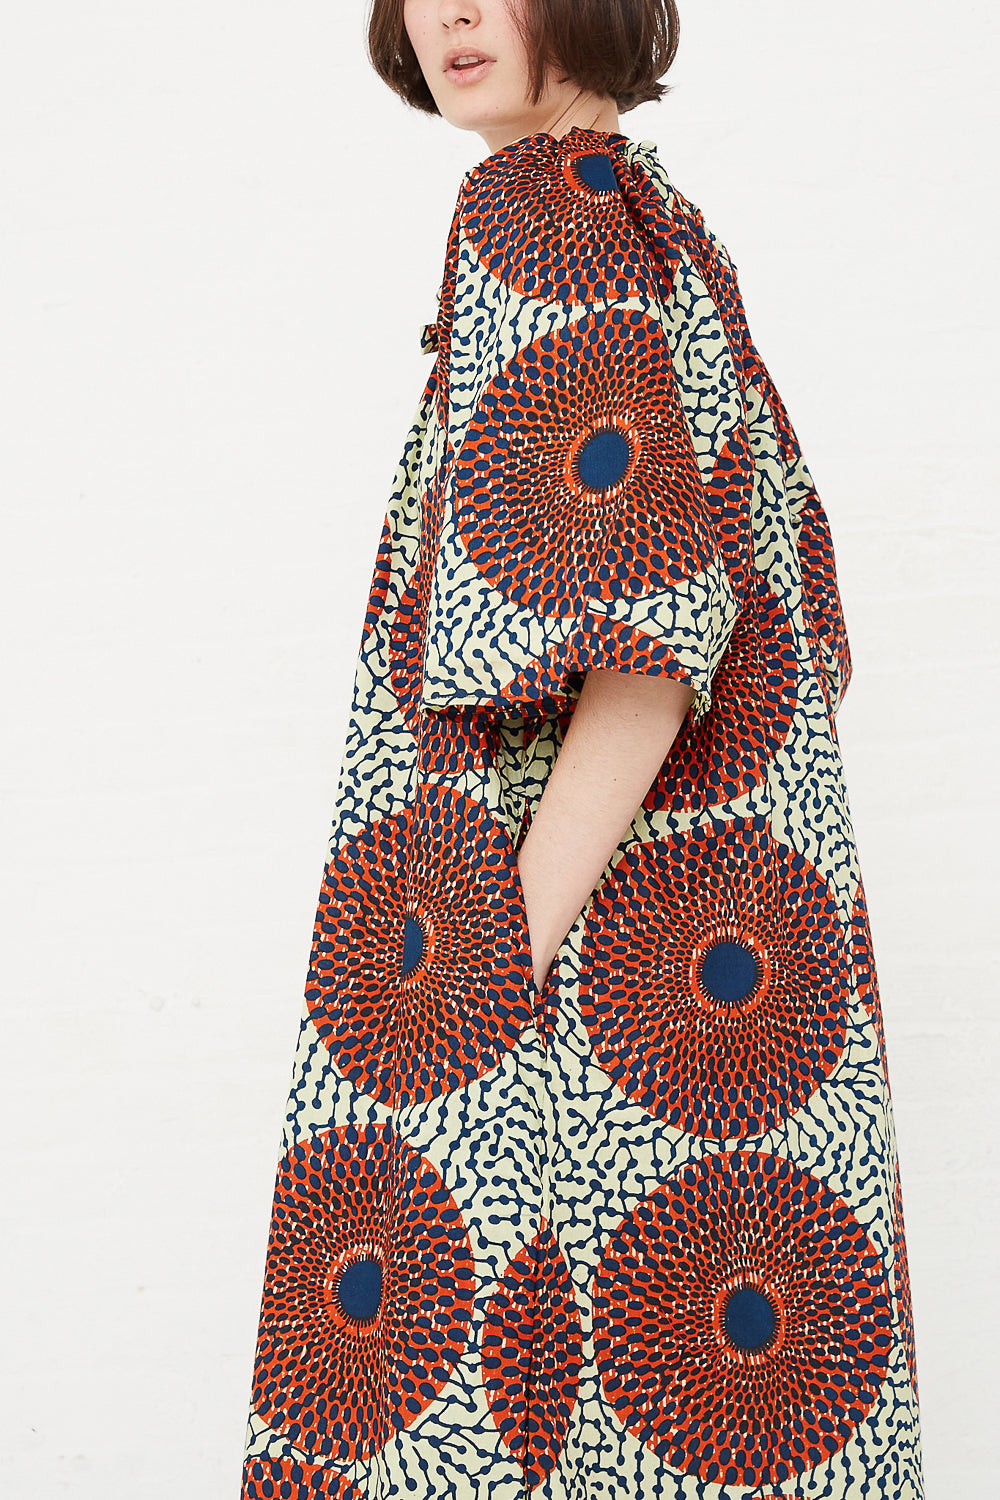 Odile Jacobs - Arabelle Dress in Rust Circles hand in pocket side detail